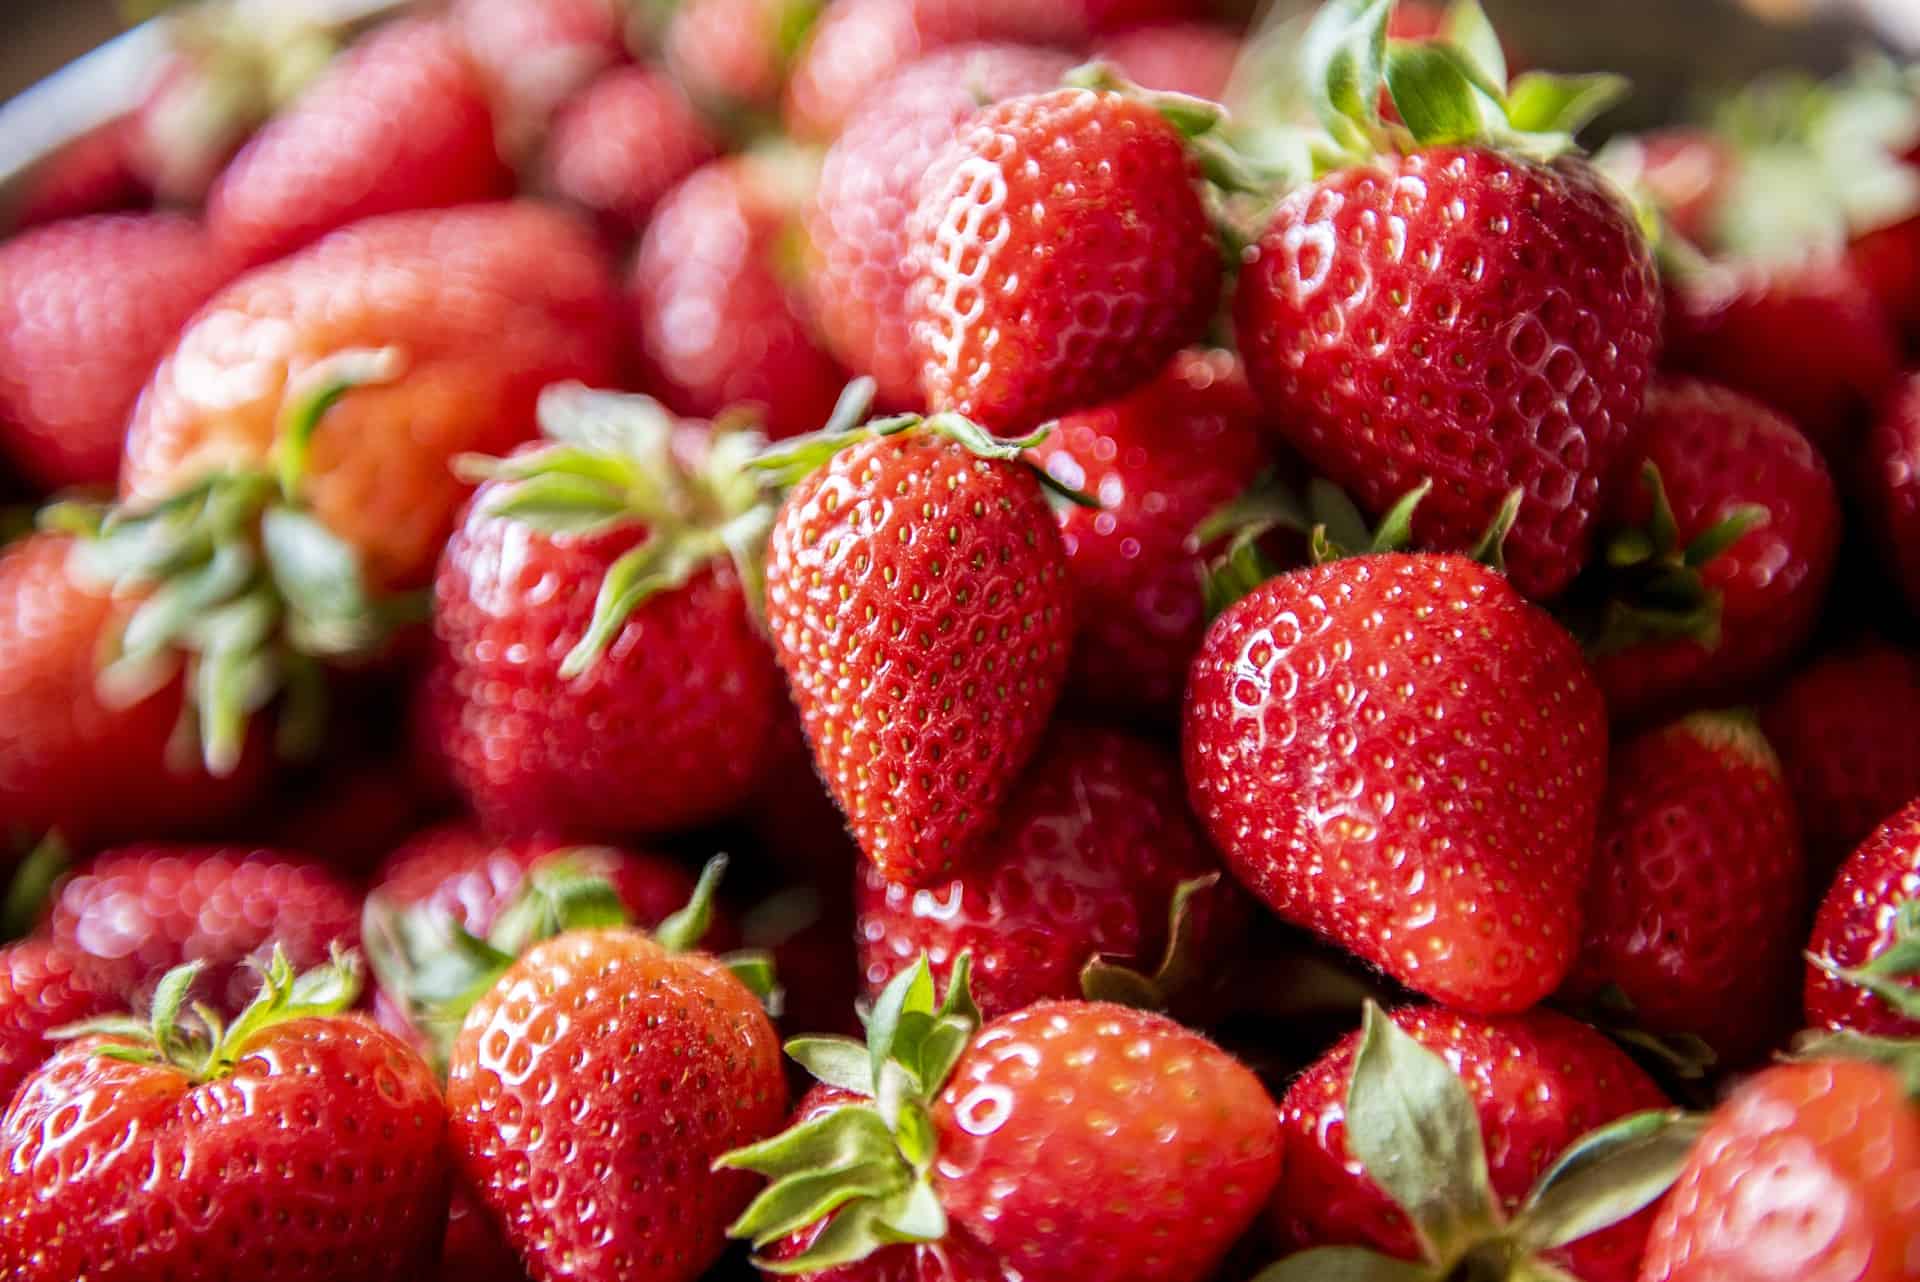 What to make for breakfast with strawberries?